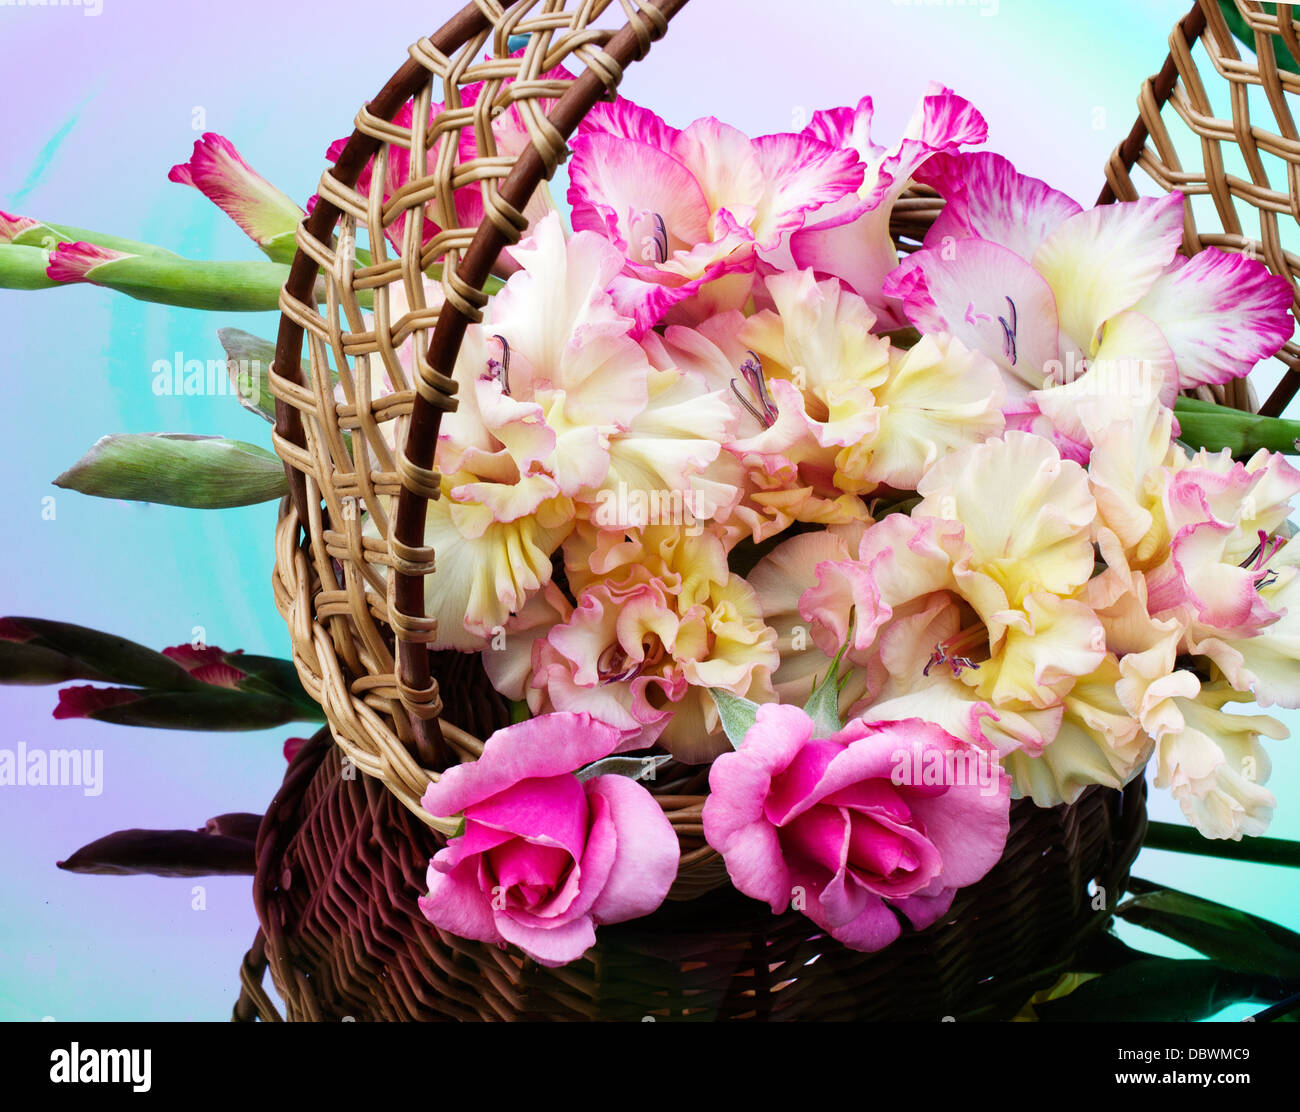 bouquet of gladioli and roses are in a wicker basket Stock Photo